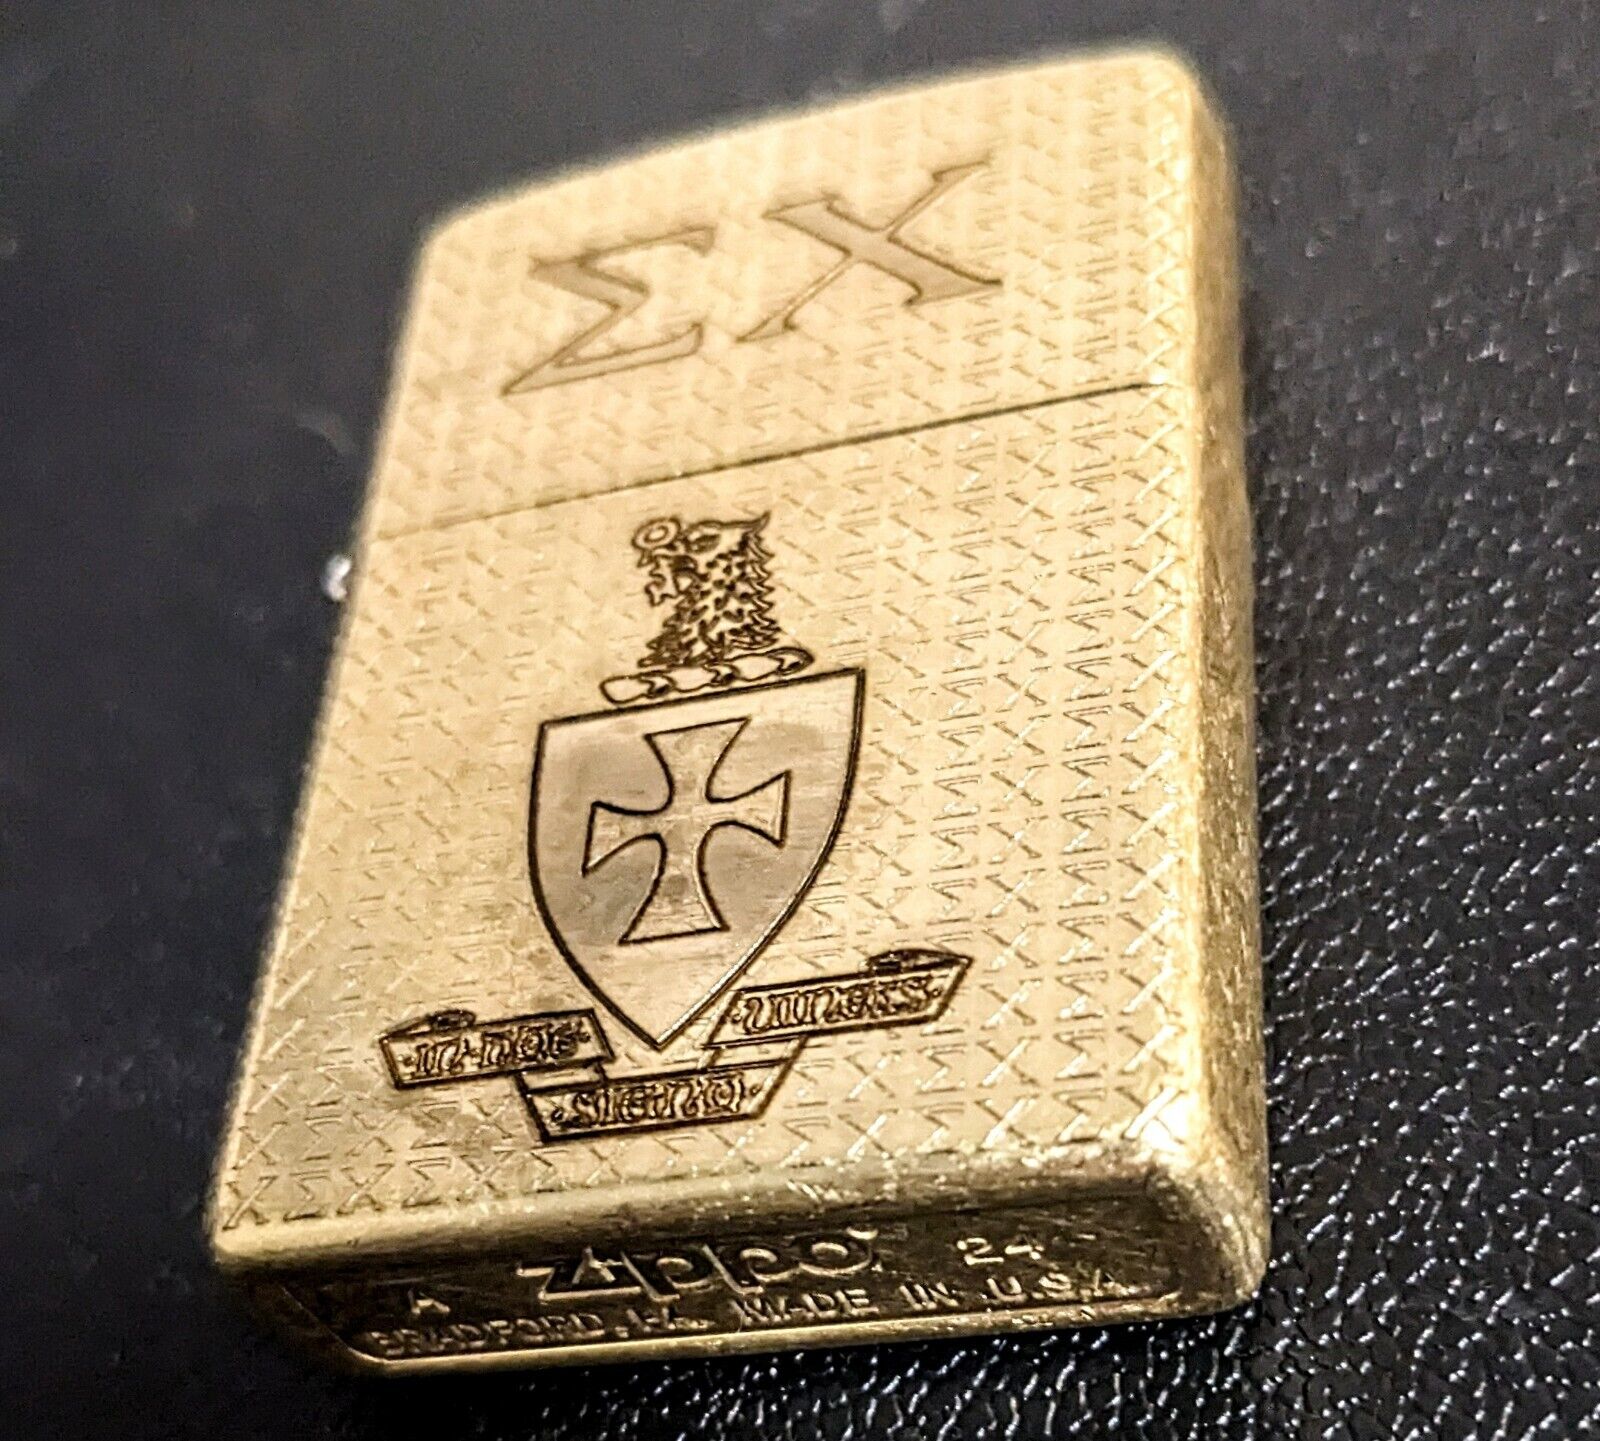 Signs Chi All Brass Zippo Fraternity Classy Gold Tone And Brass. 